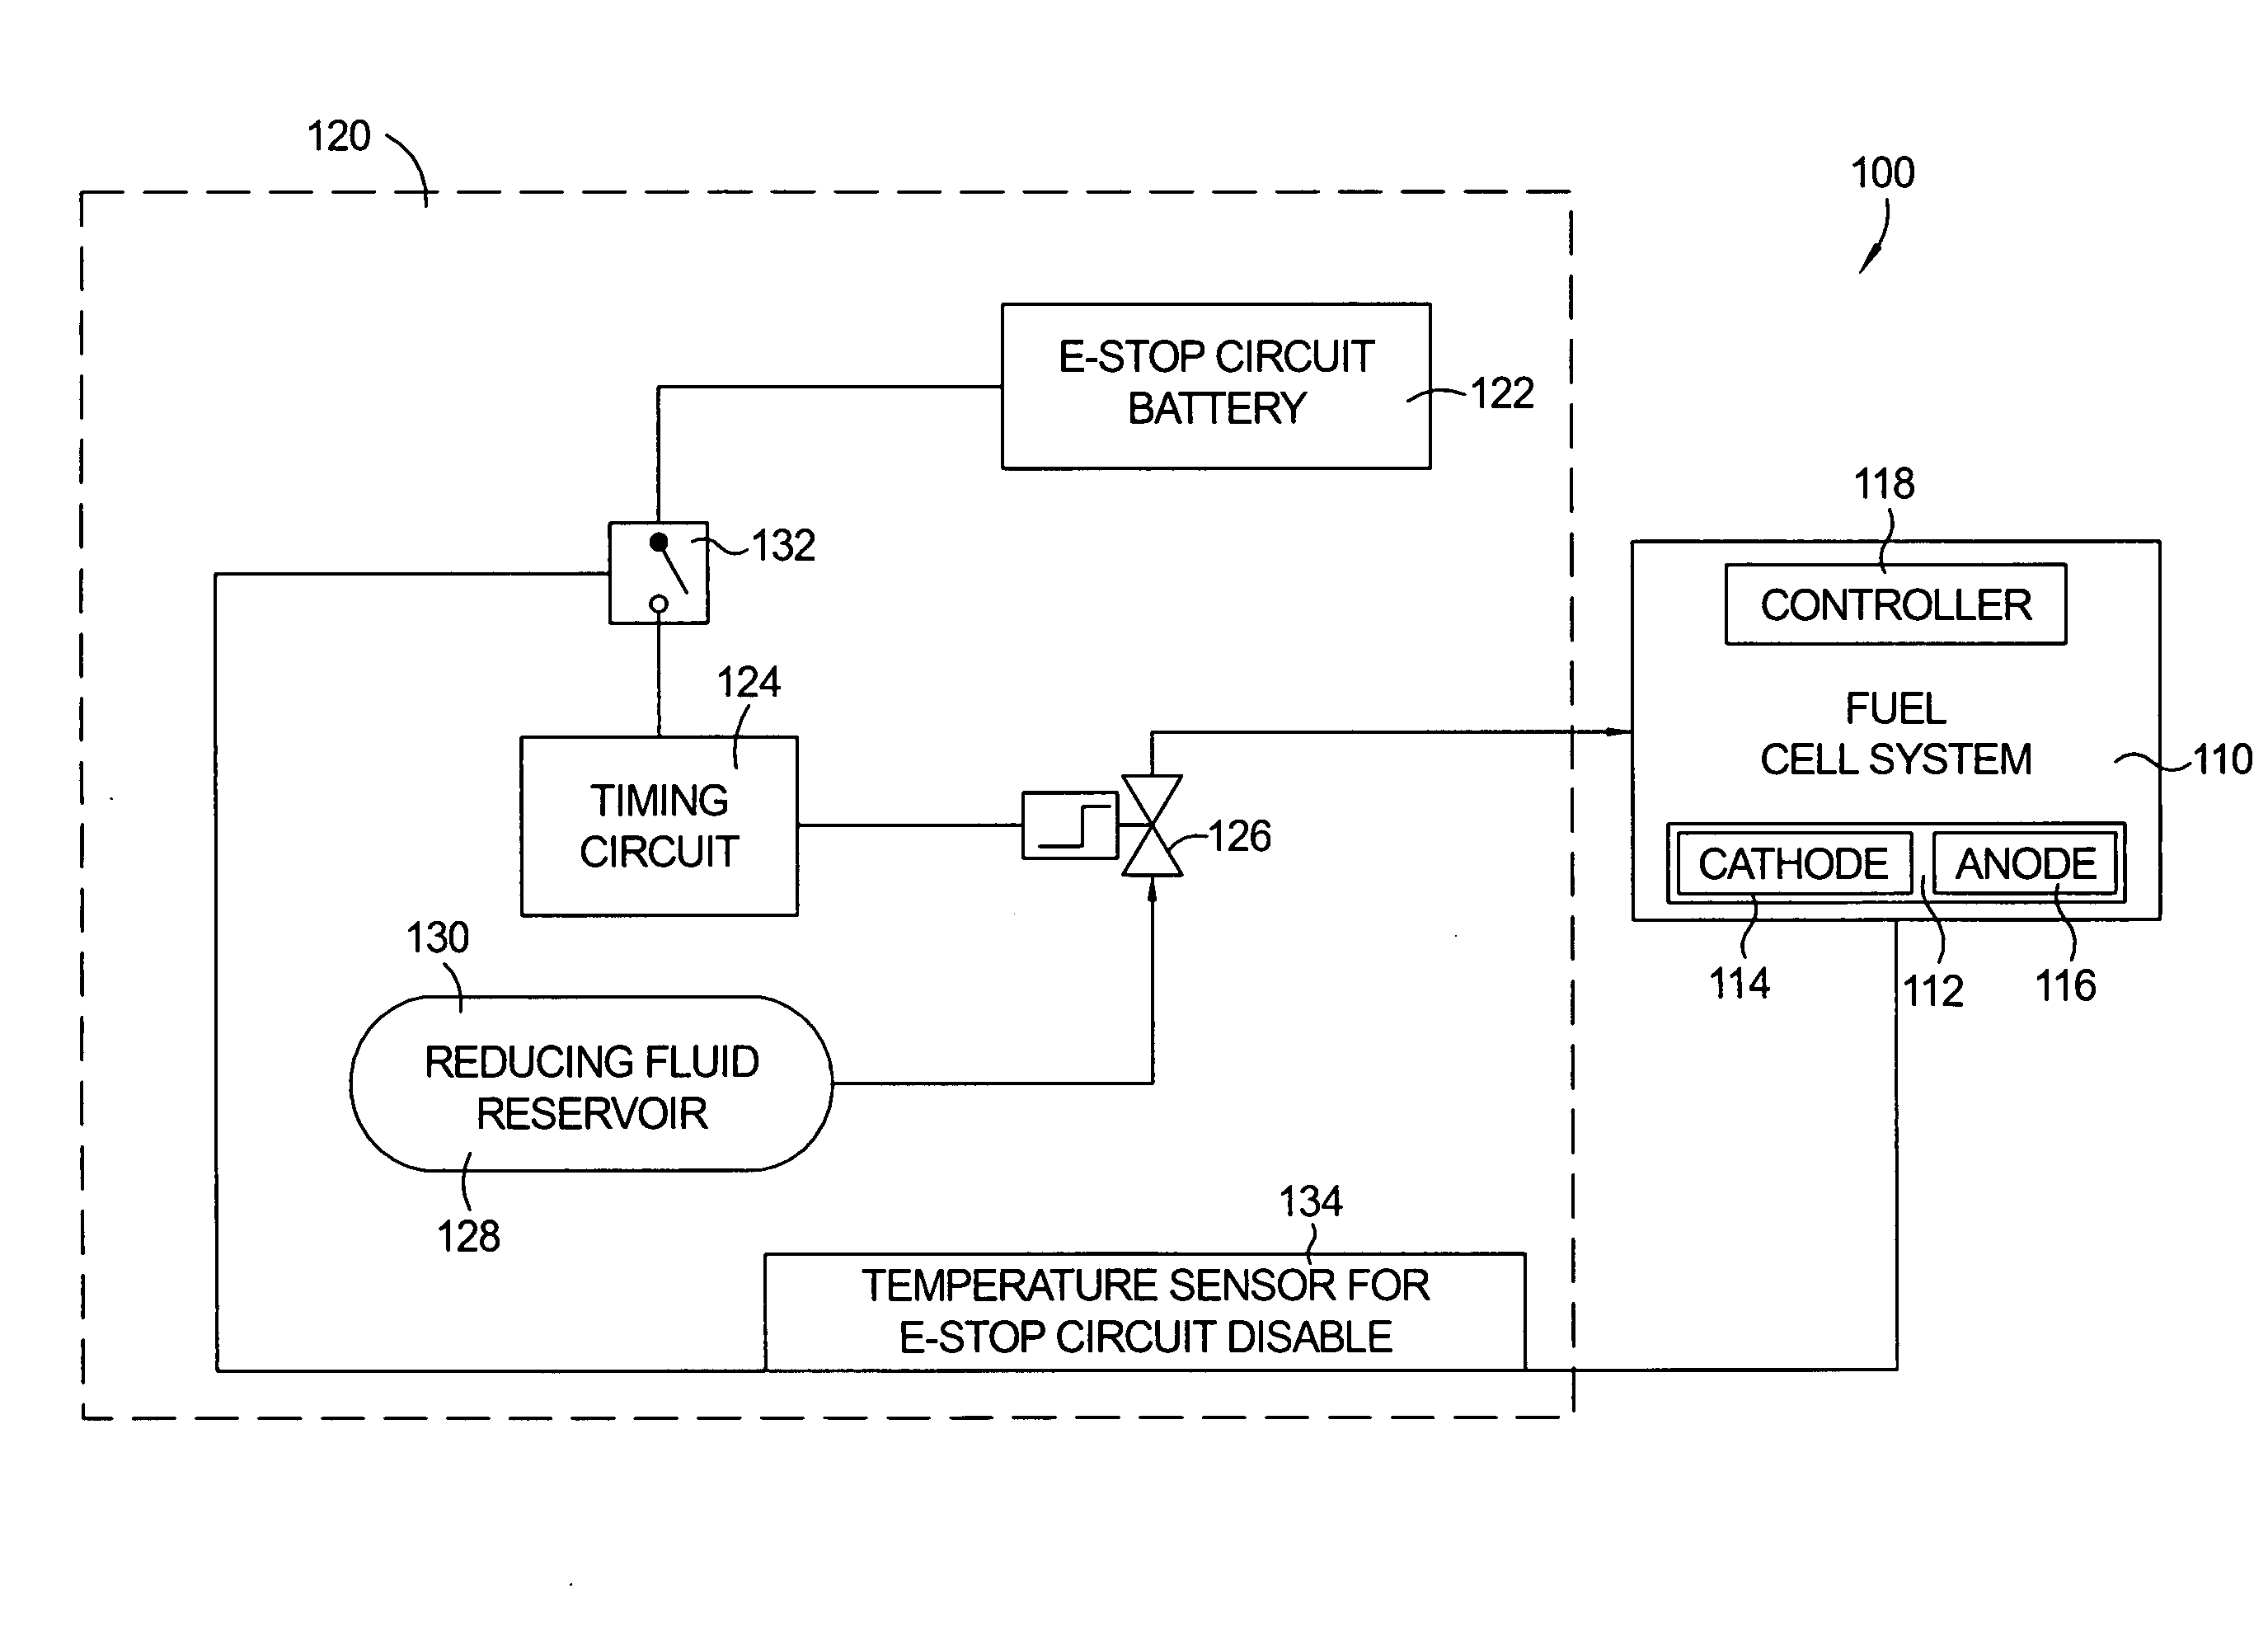 Apparatus for solid-oxide fuel cell shutdown